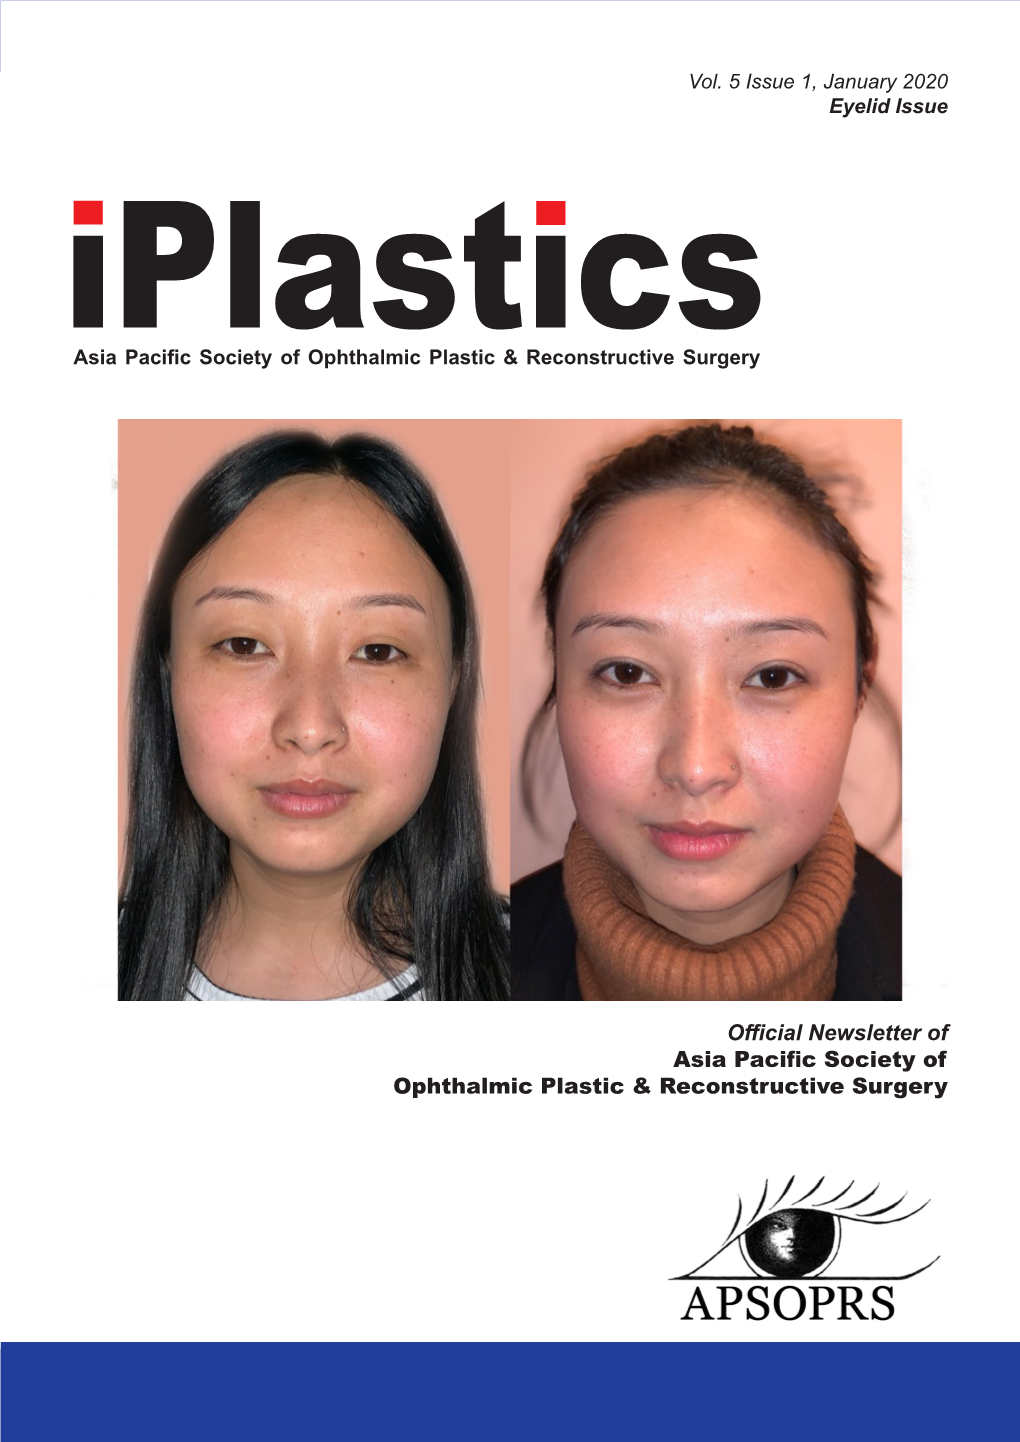 Official Newsletter of Asia Pacific Society of Ophthalmic Plastic & Reconstructive Surgery